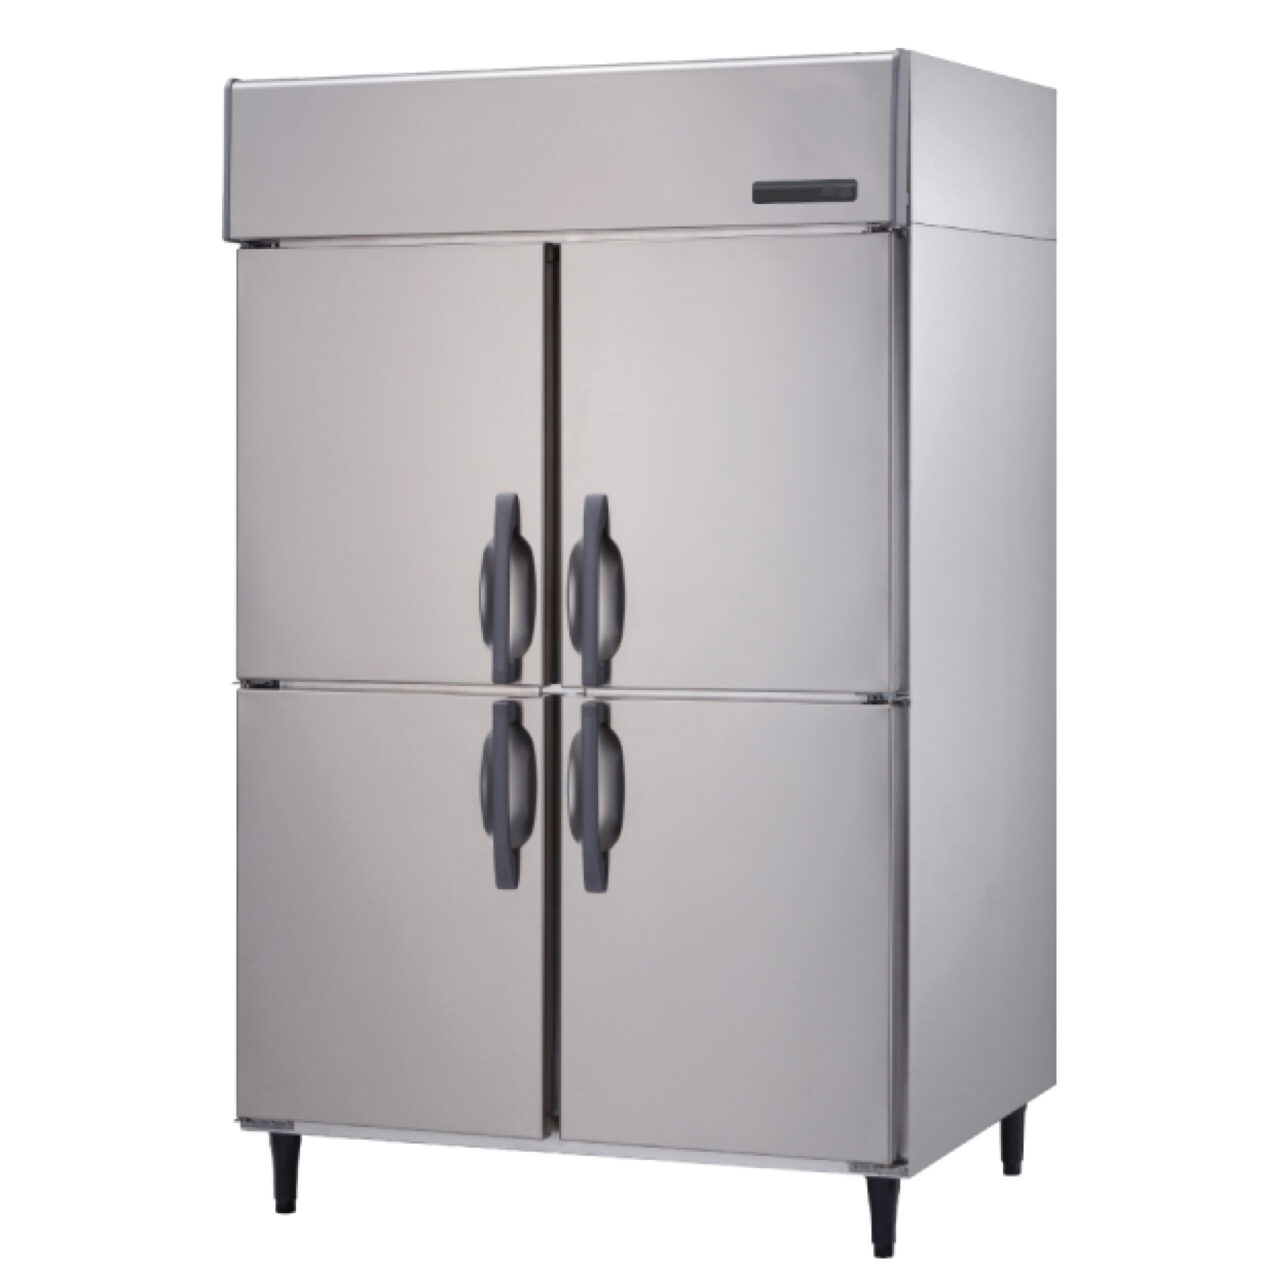 -23~-7℃ Air Cooling 4 Solid Doors Upright Reach-in Refrigerator Commercial Refrigerator